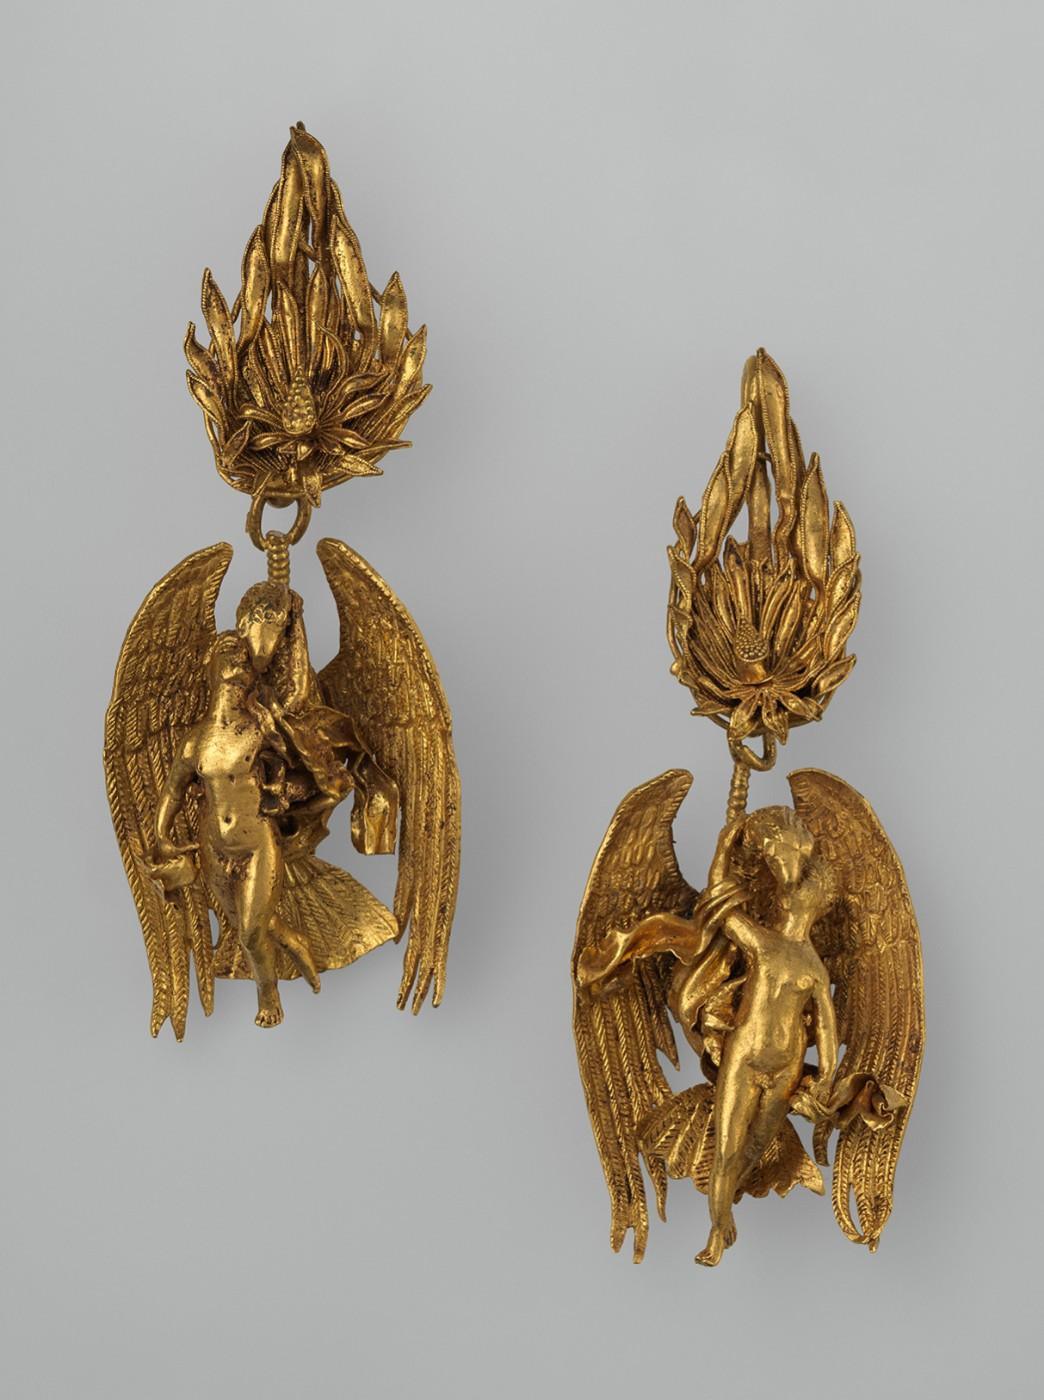 Pair of gold earrings with Ganymede and the eagle.